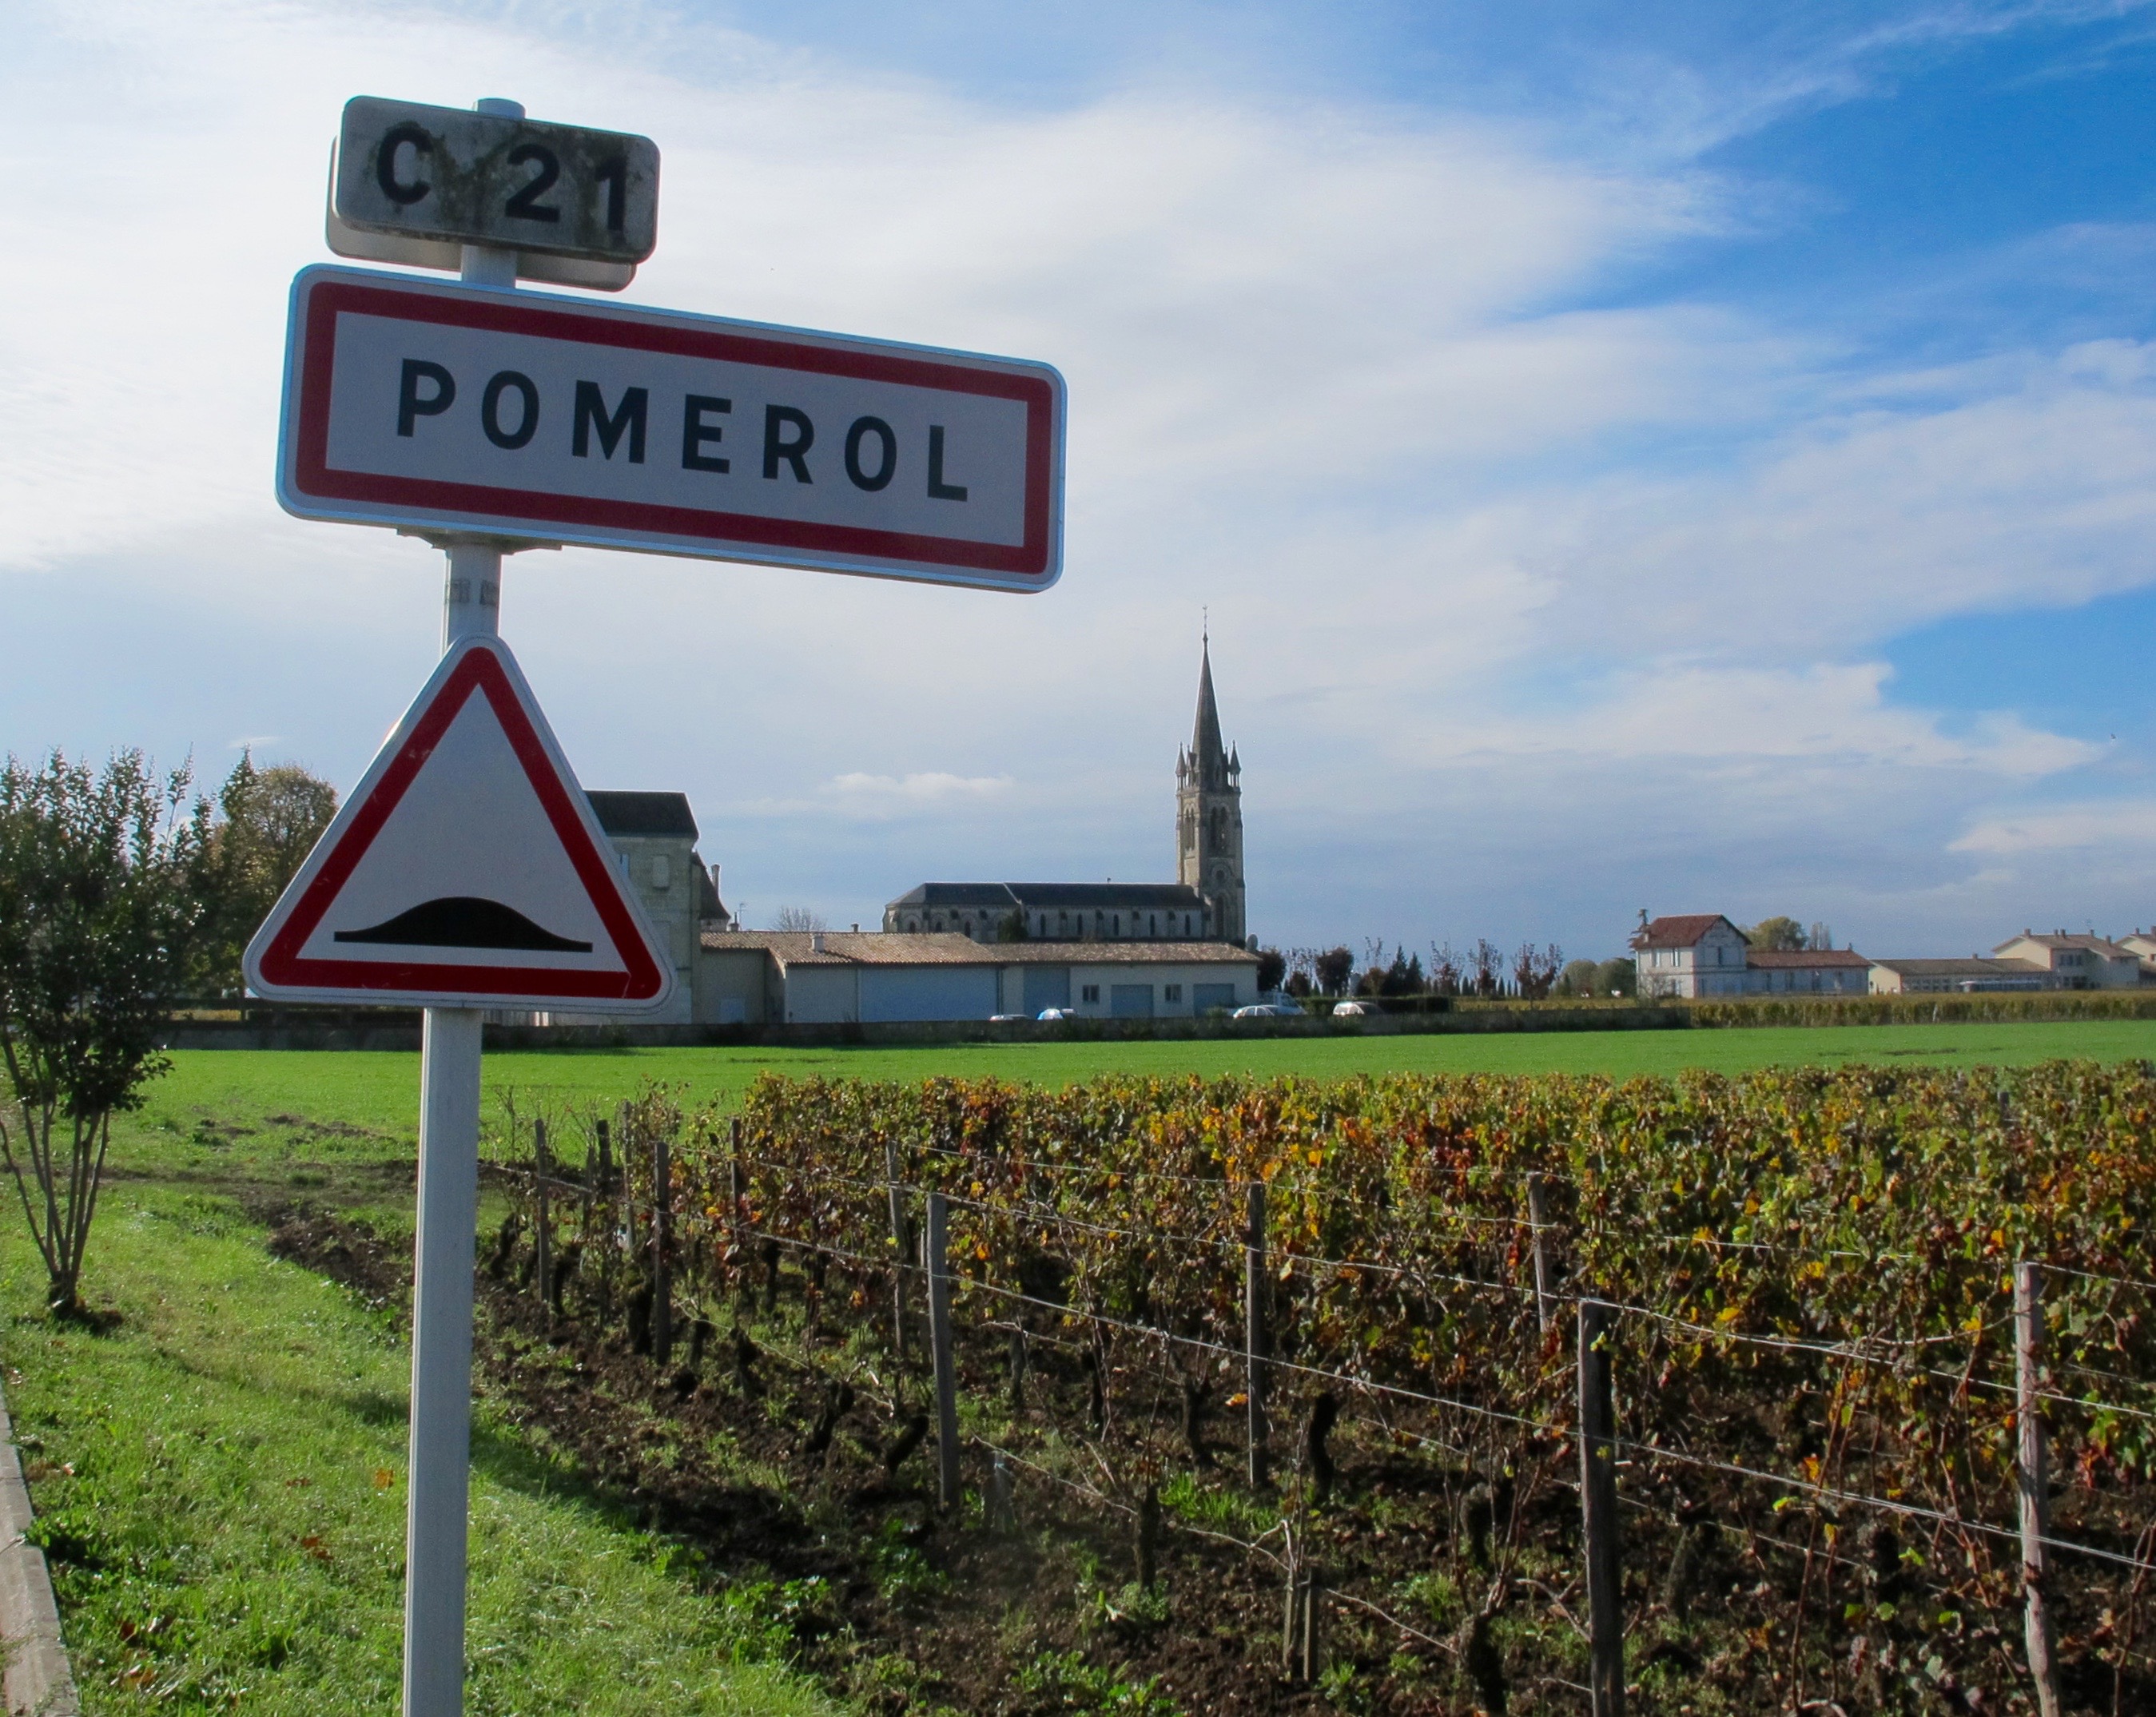 Some of the most sought-after wines in Bordeaux come from the tiny appelation of Pomerol. Photo by Marla Norman.